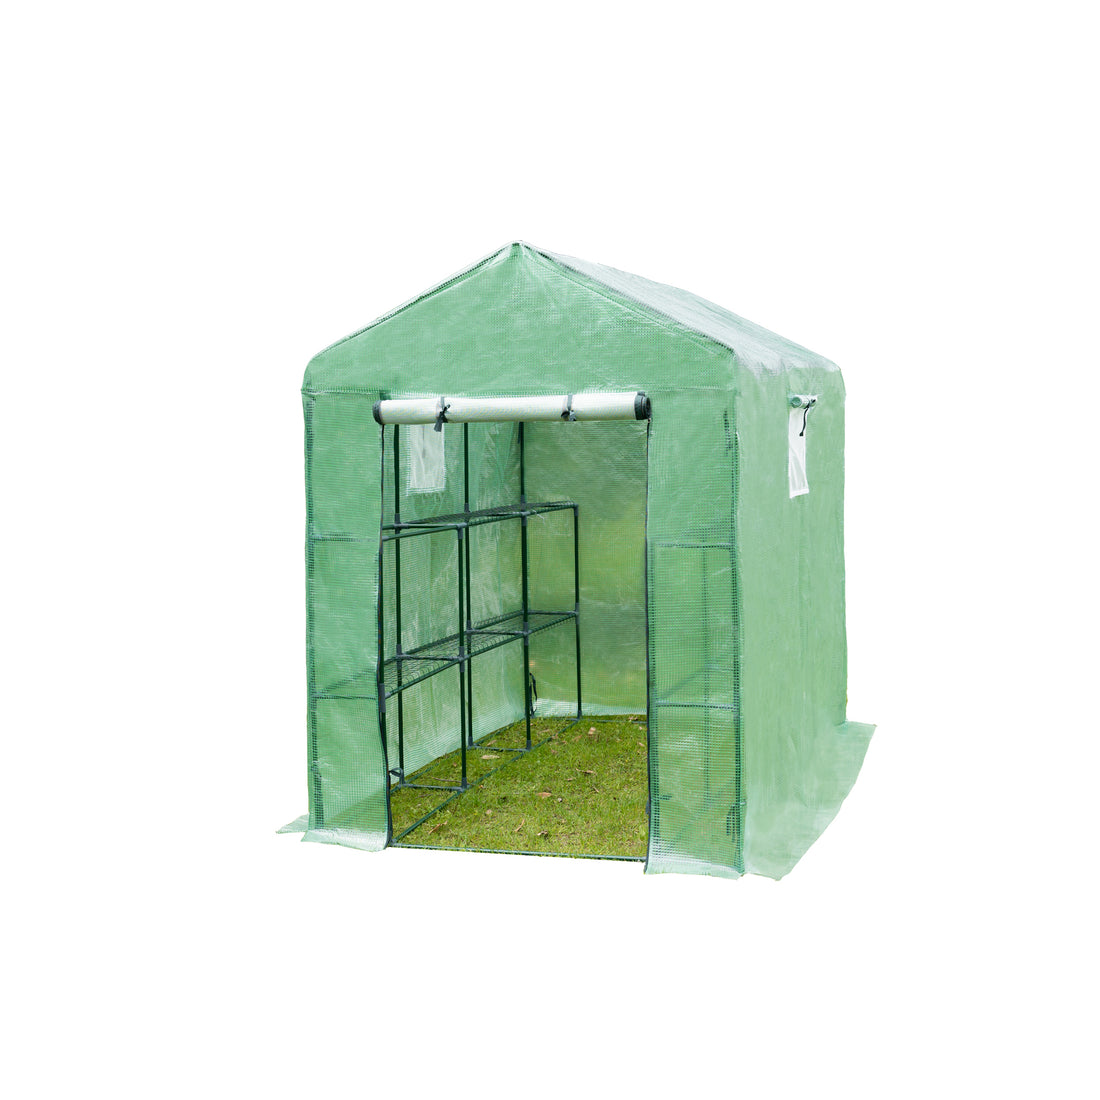 7.1' x 4.7' x 6.4' Walk in Green House, Plant Garden Hot House 3-Tier Wire Shelves, Outside Garden Plastic Green House, Durable Green House Kit with Window for Seedling Flowers Growing